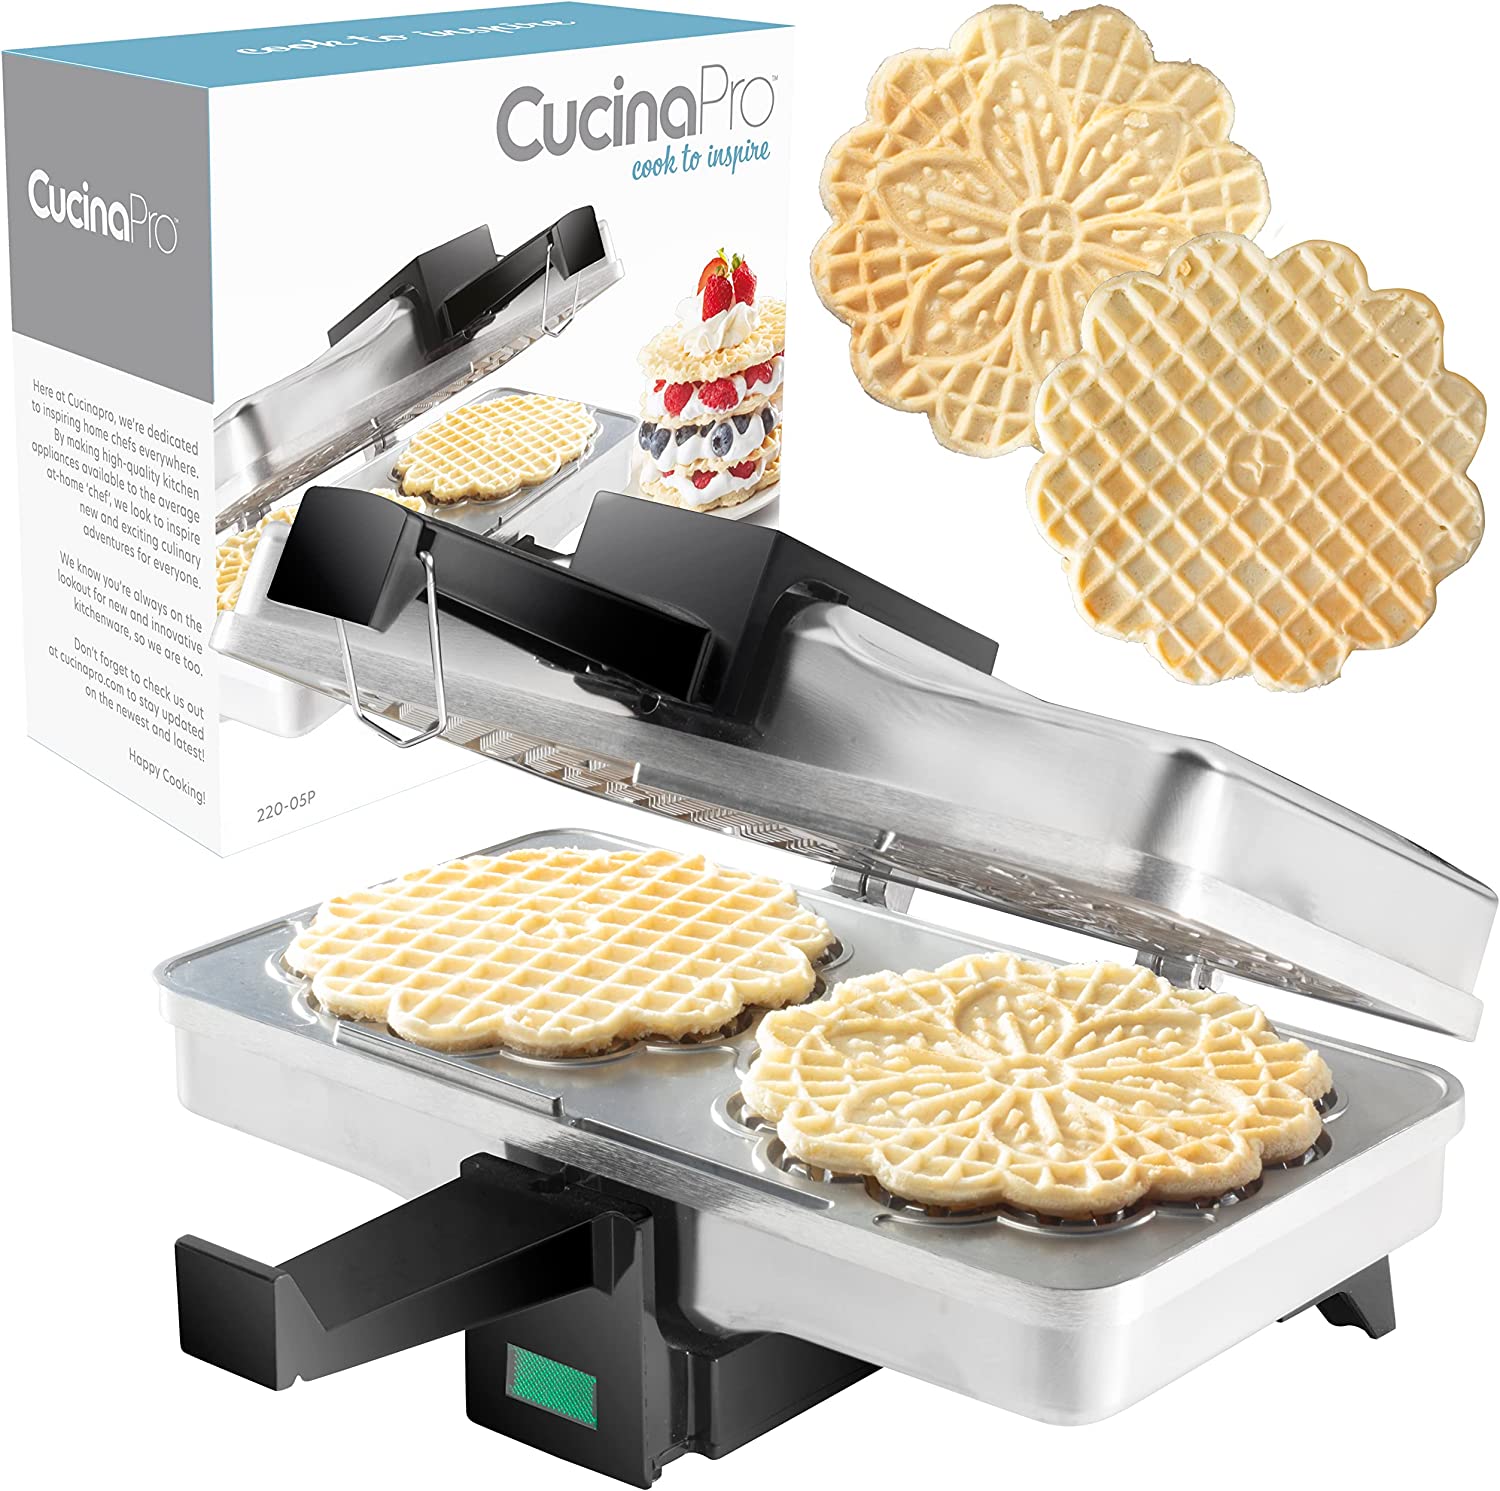 Pizzelle Maker - Polished Electric Baker Press Makes Two 5-Inch Cookies at Once - Recipes Included - image 1 of 5